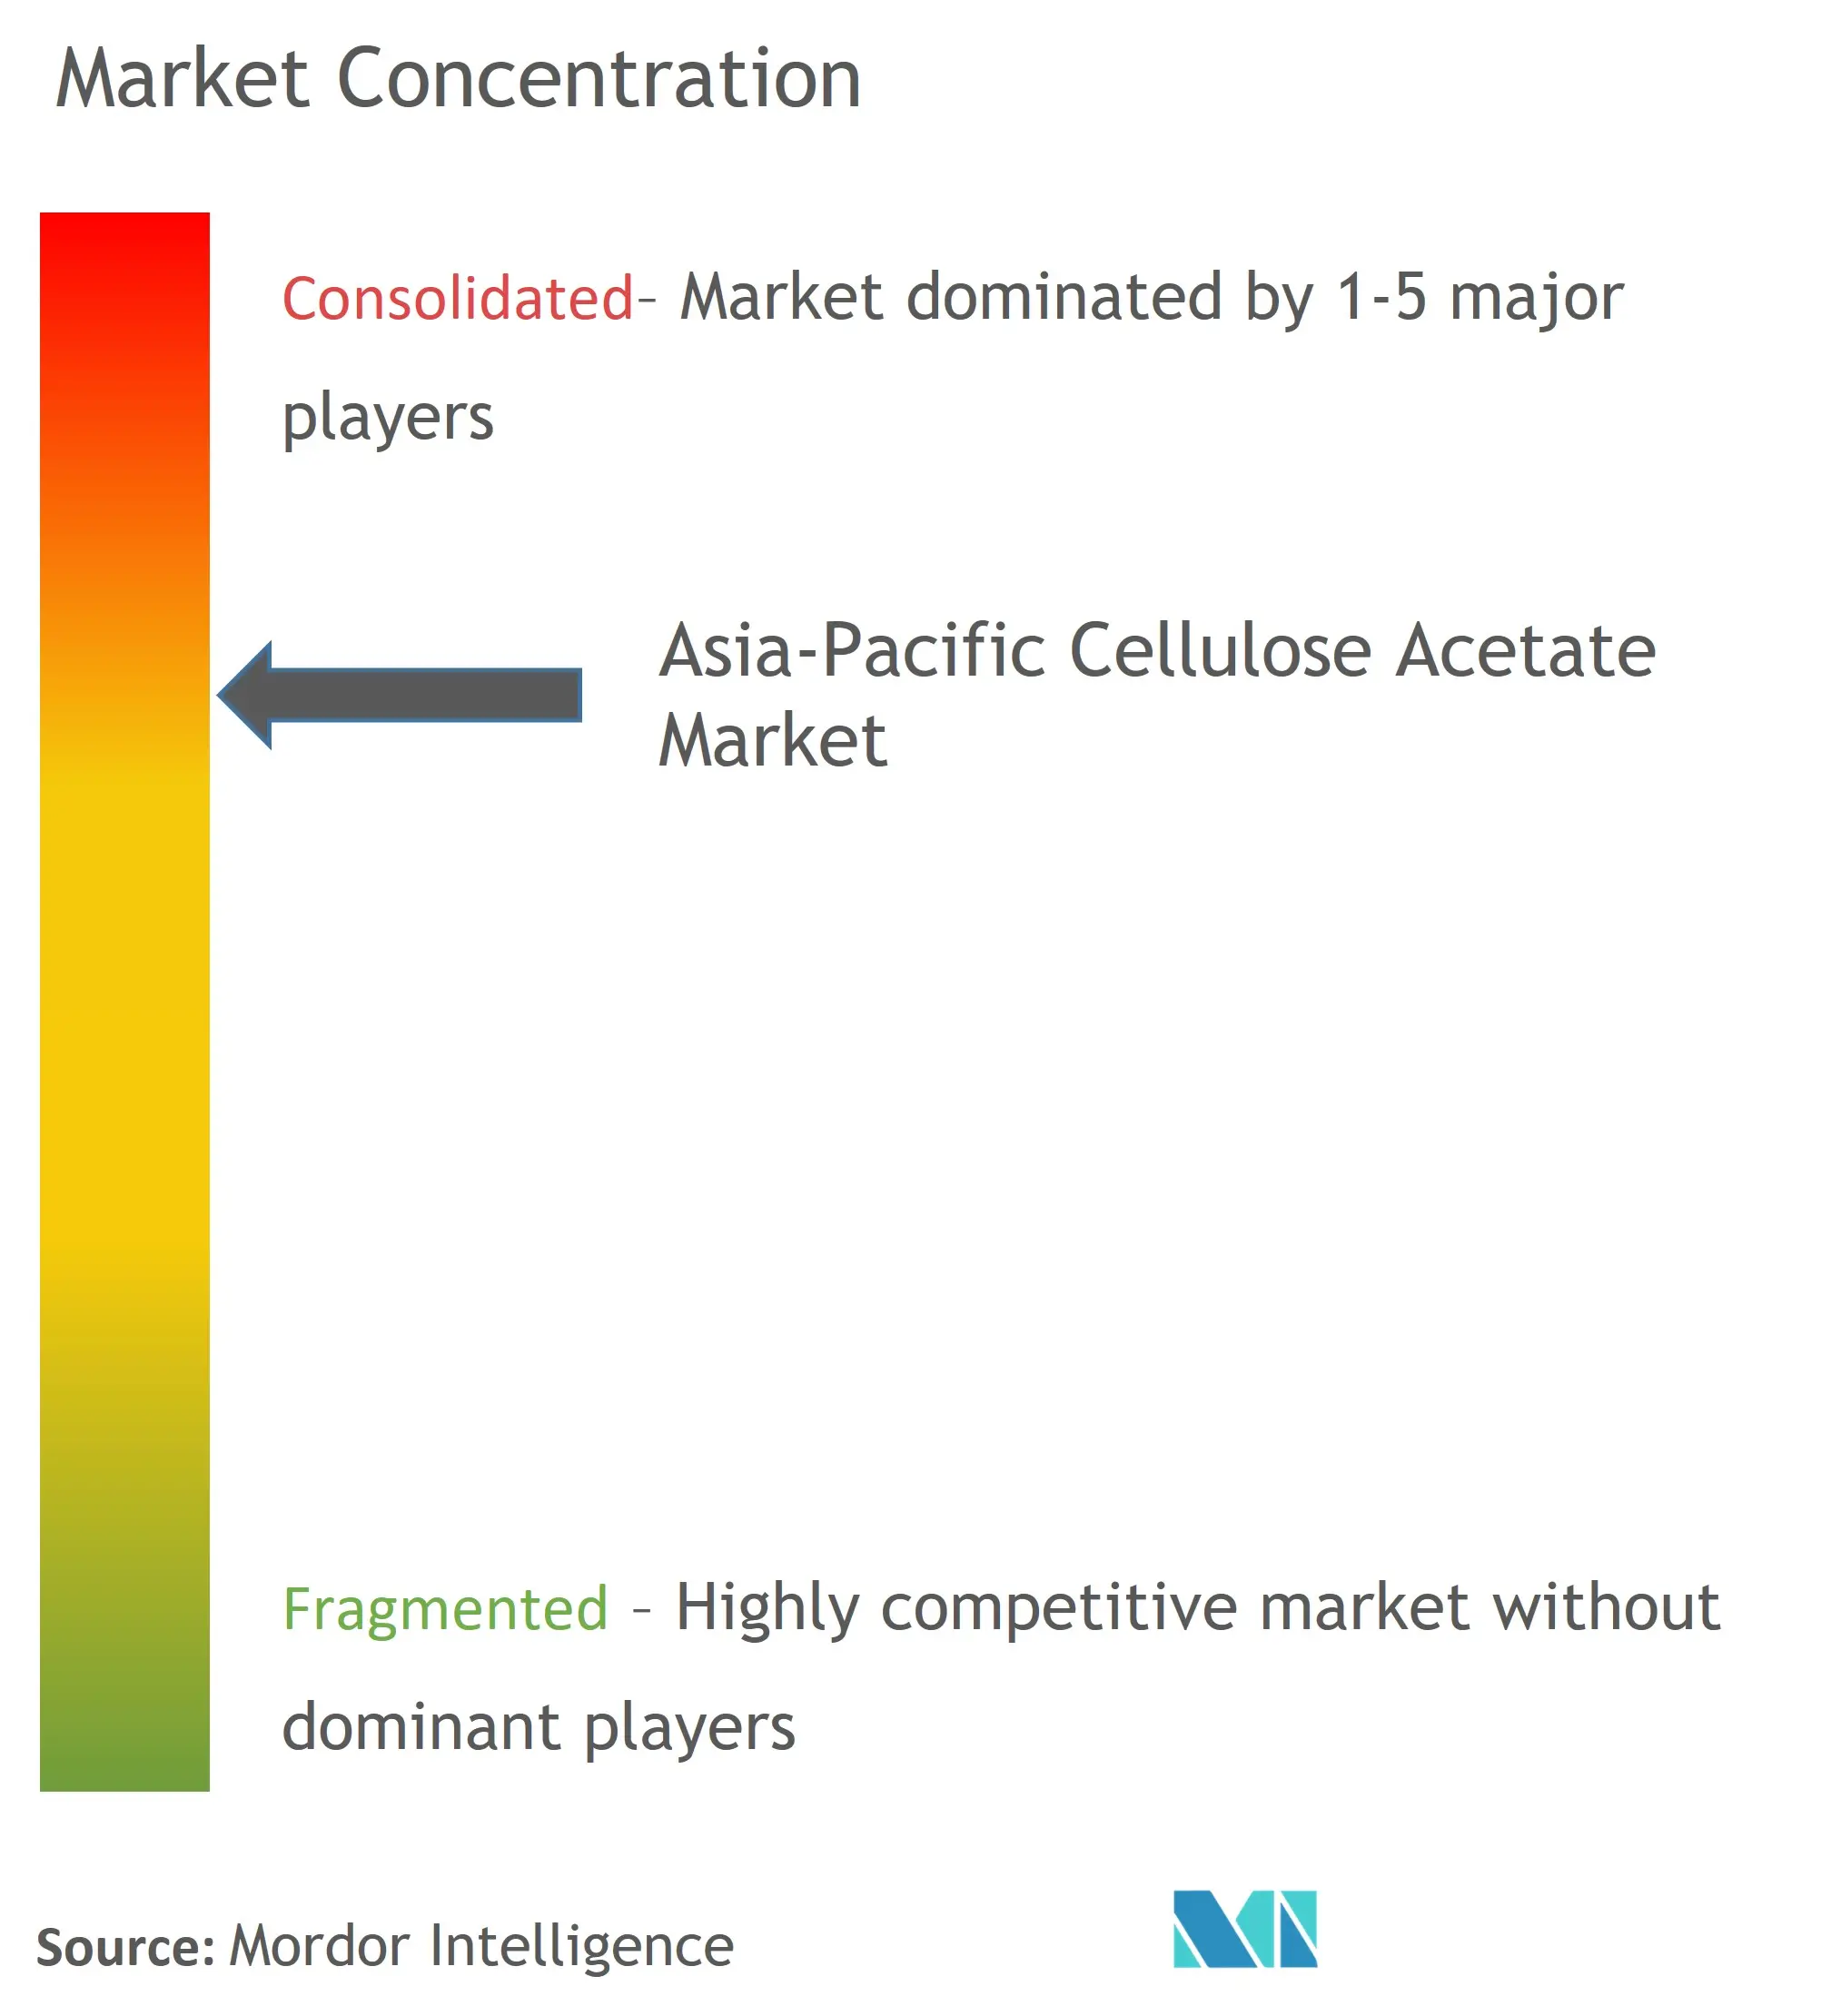 Asia Pacific Cellulose Acetate Market Concentration